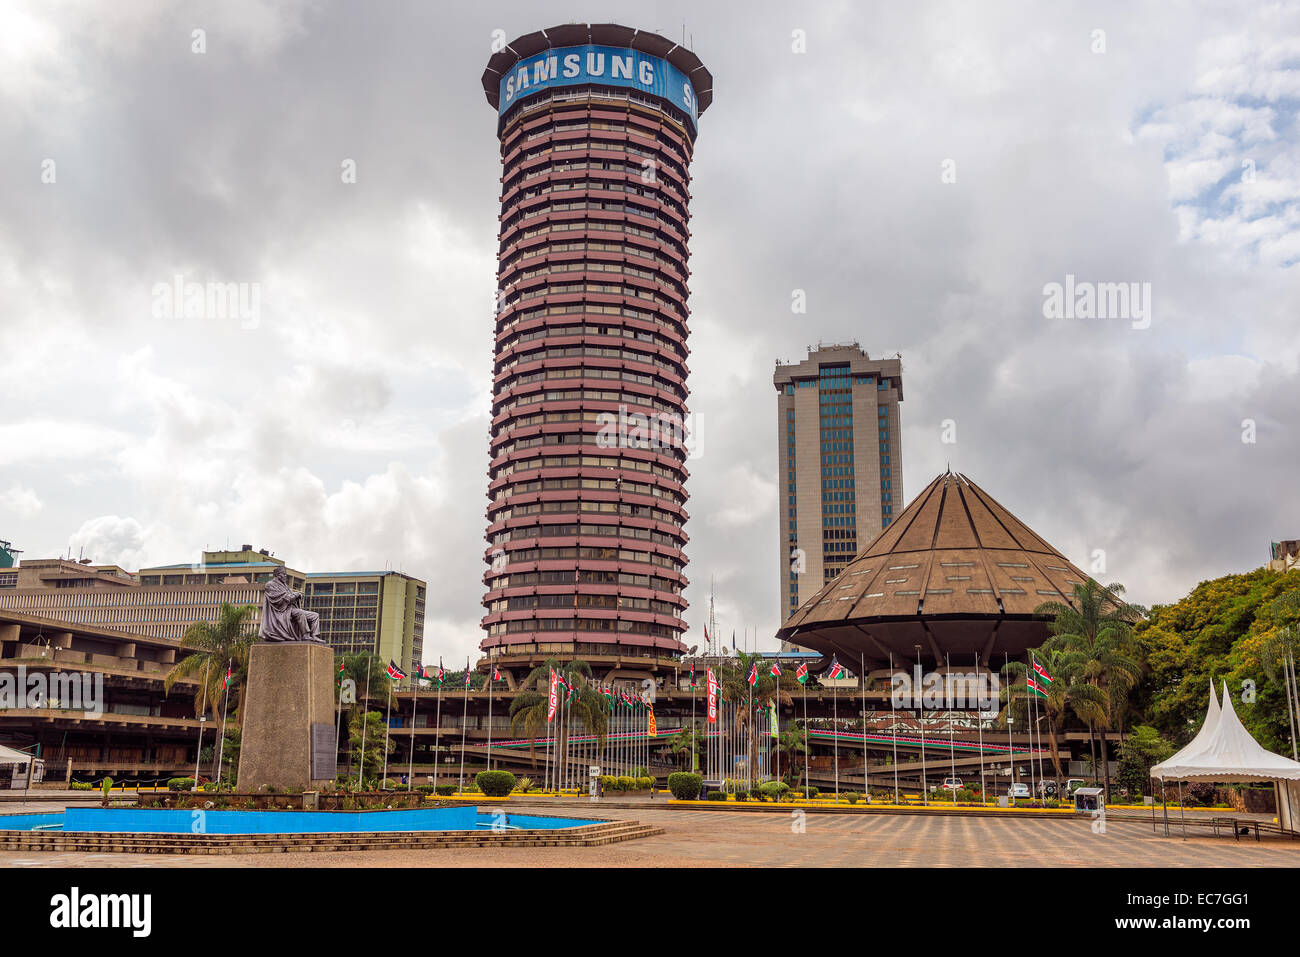 Kenyatta International Conference Centre located in the central business district of Nairobi Stock Photo